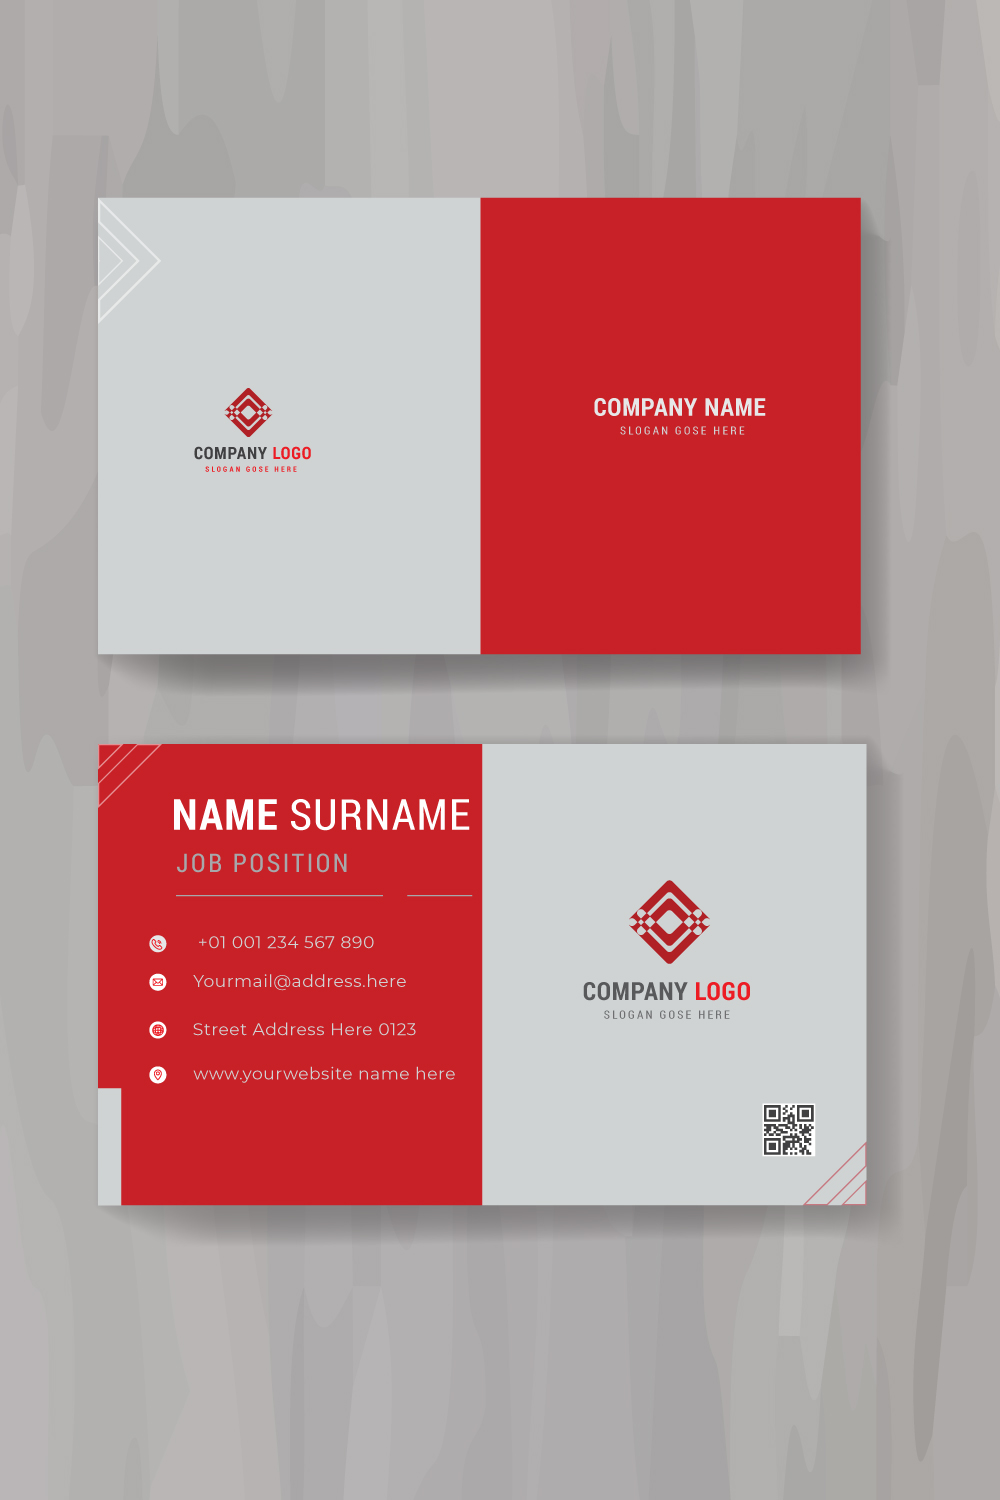 Corporate business card template for your company | Minimalist business card template design | Creative business card template pinterest preview image.